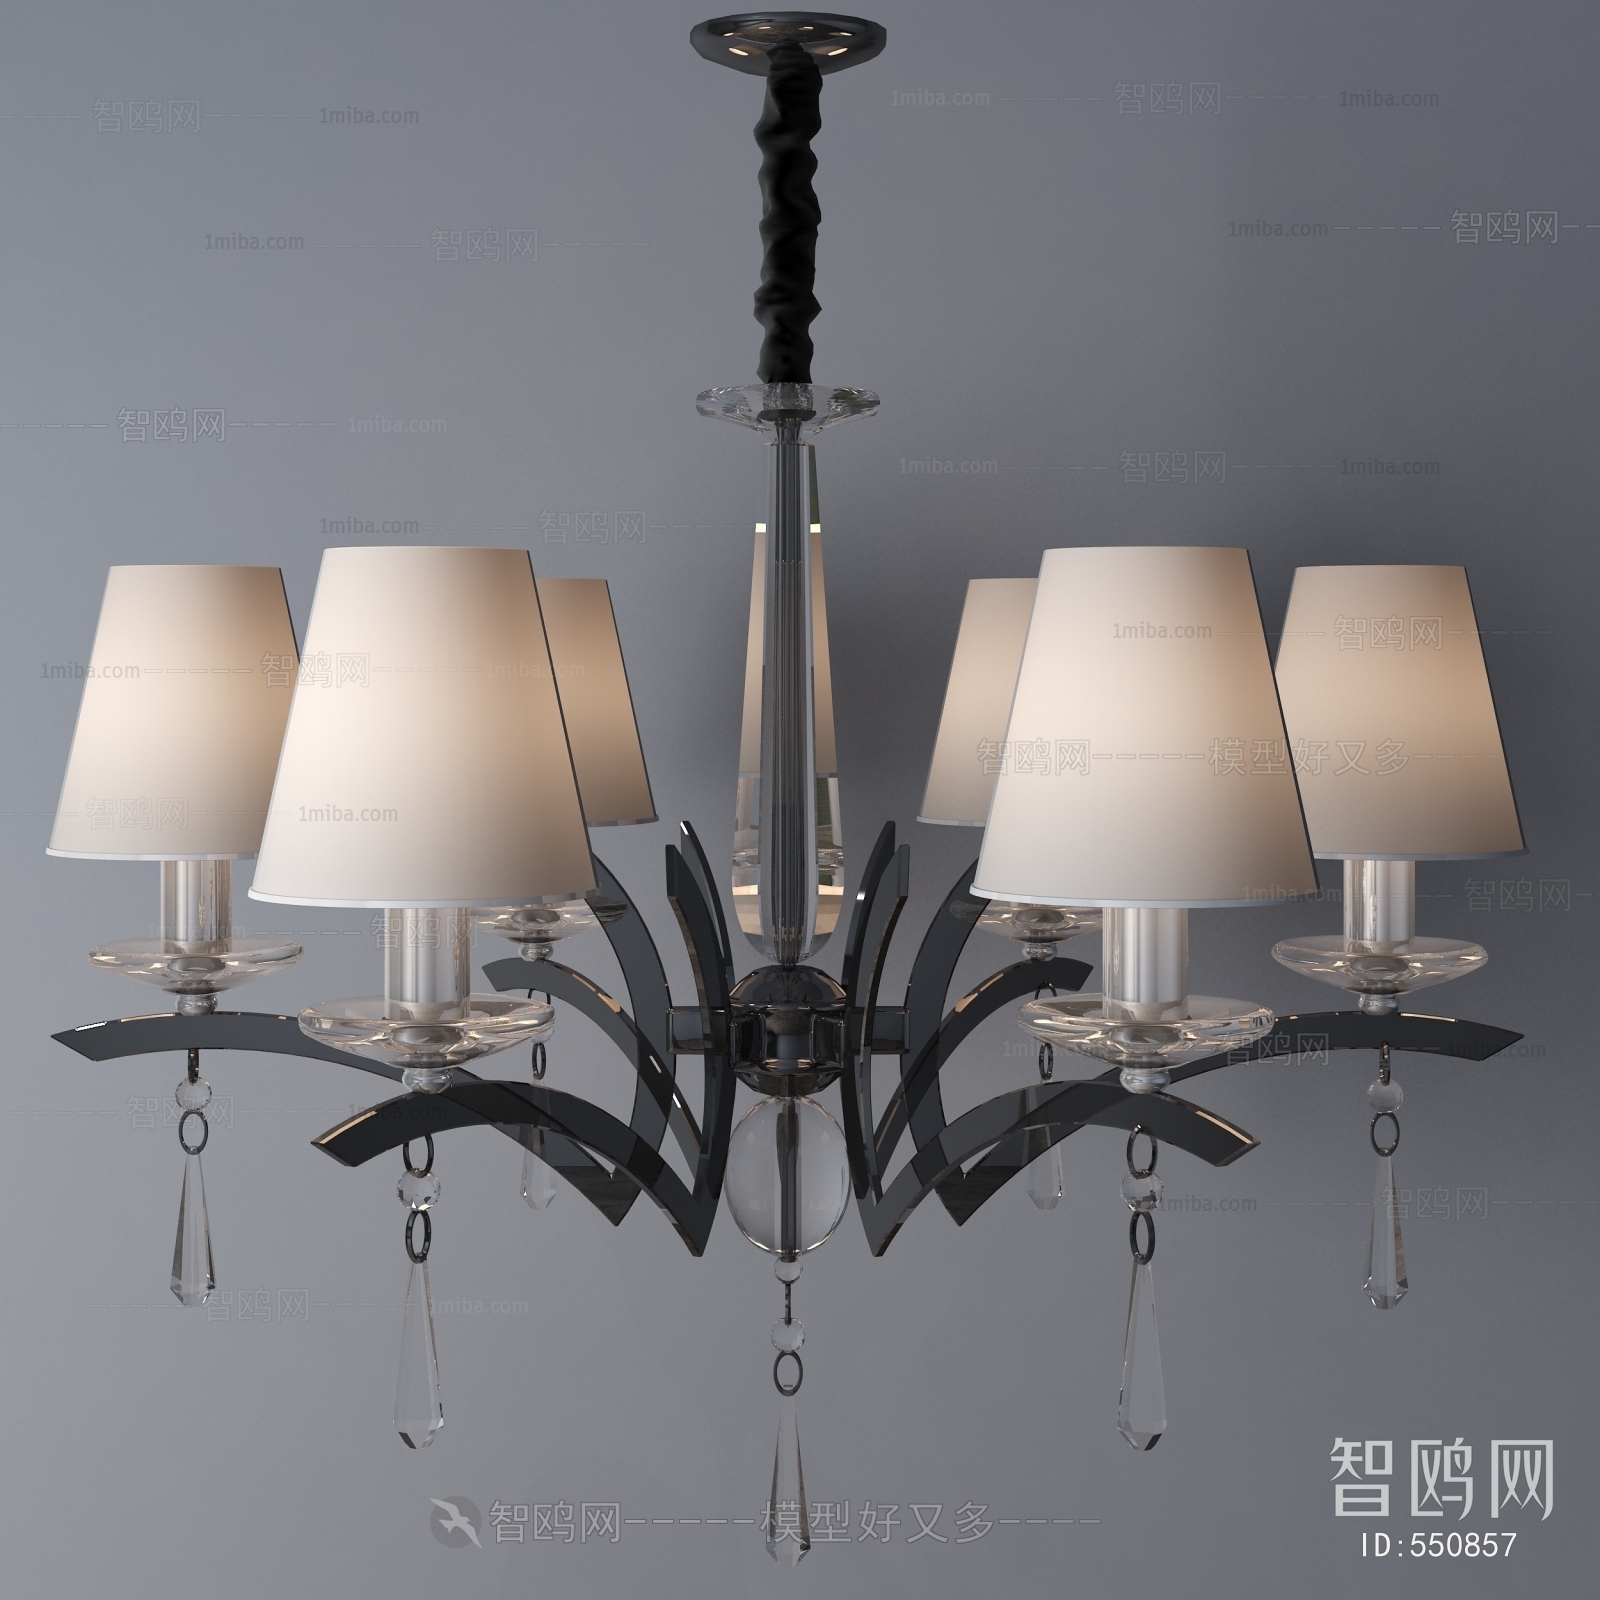 Classical Style Droplight